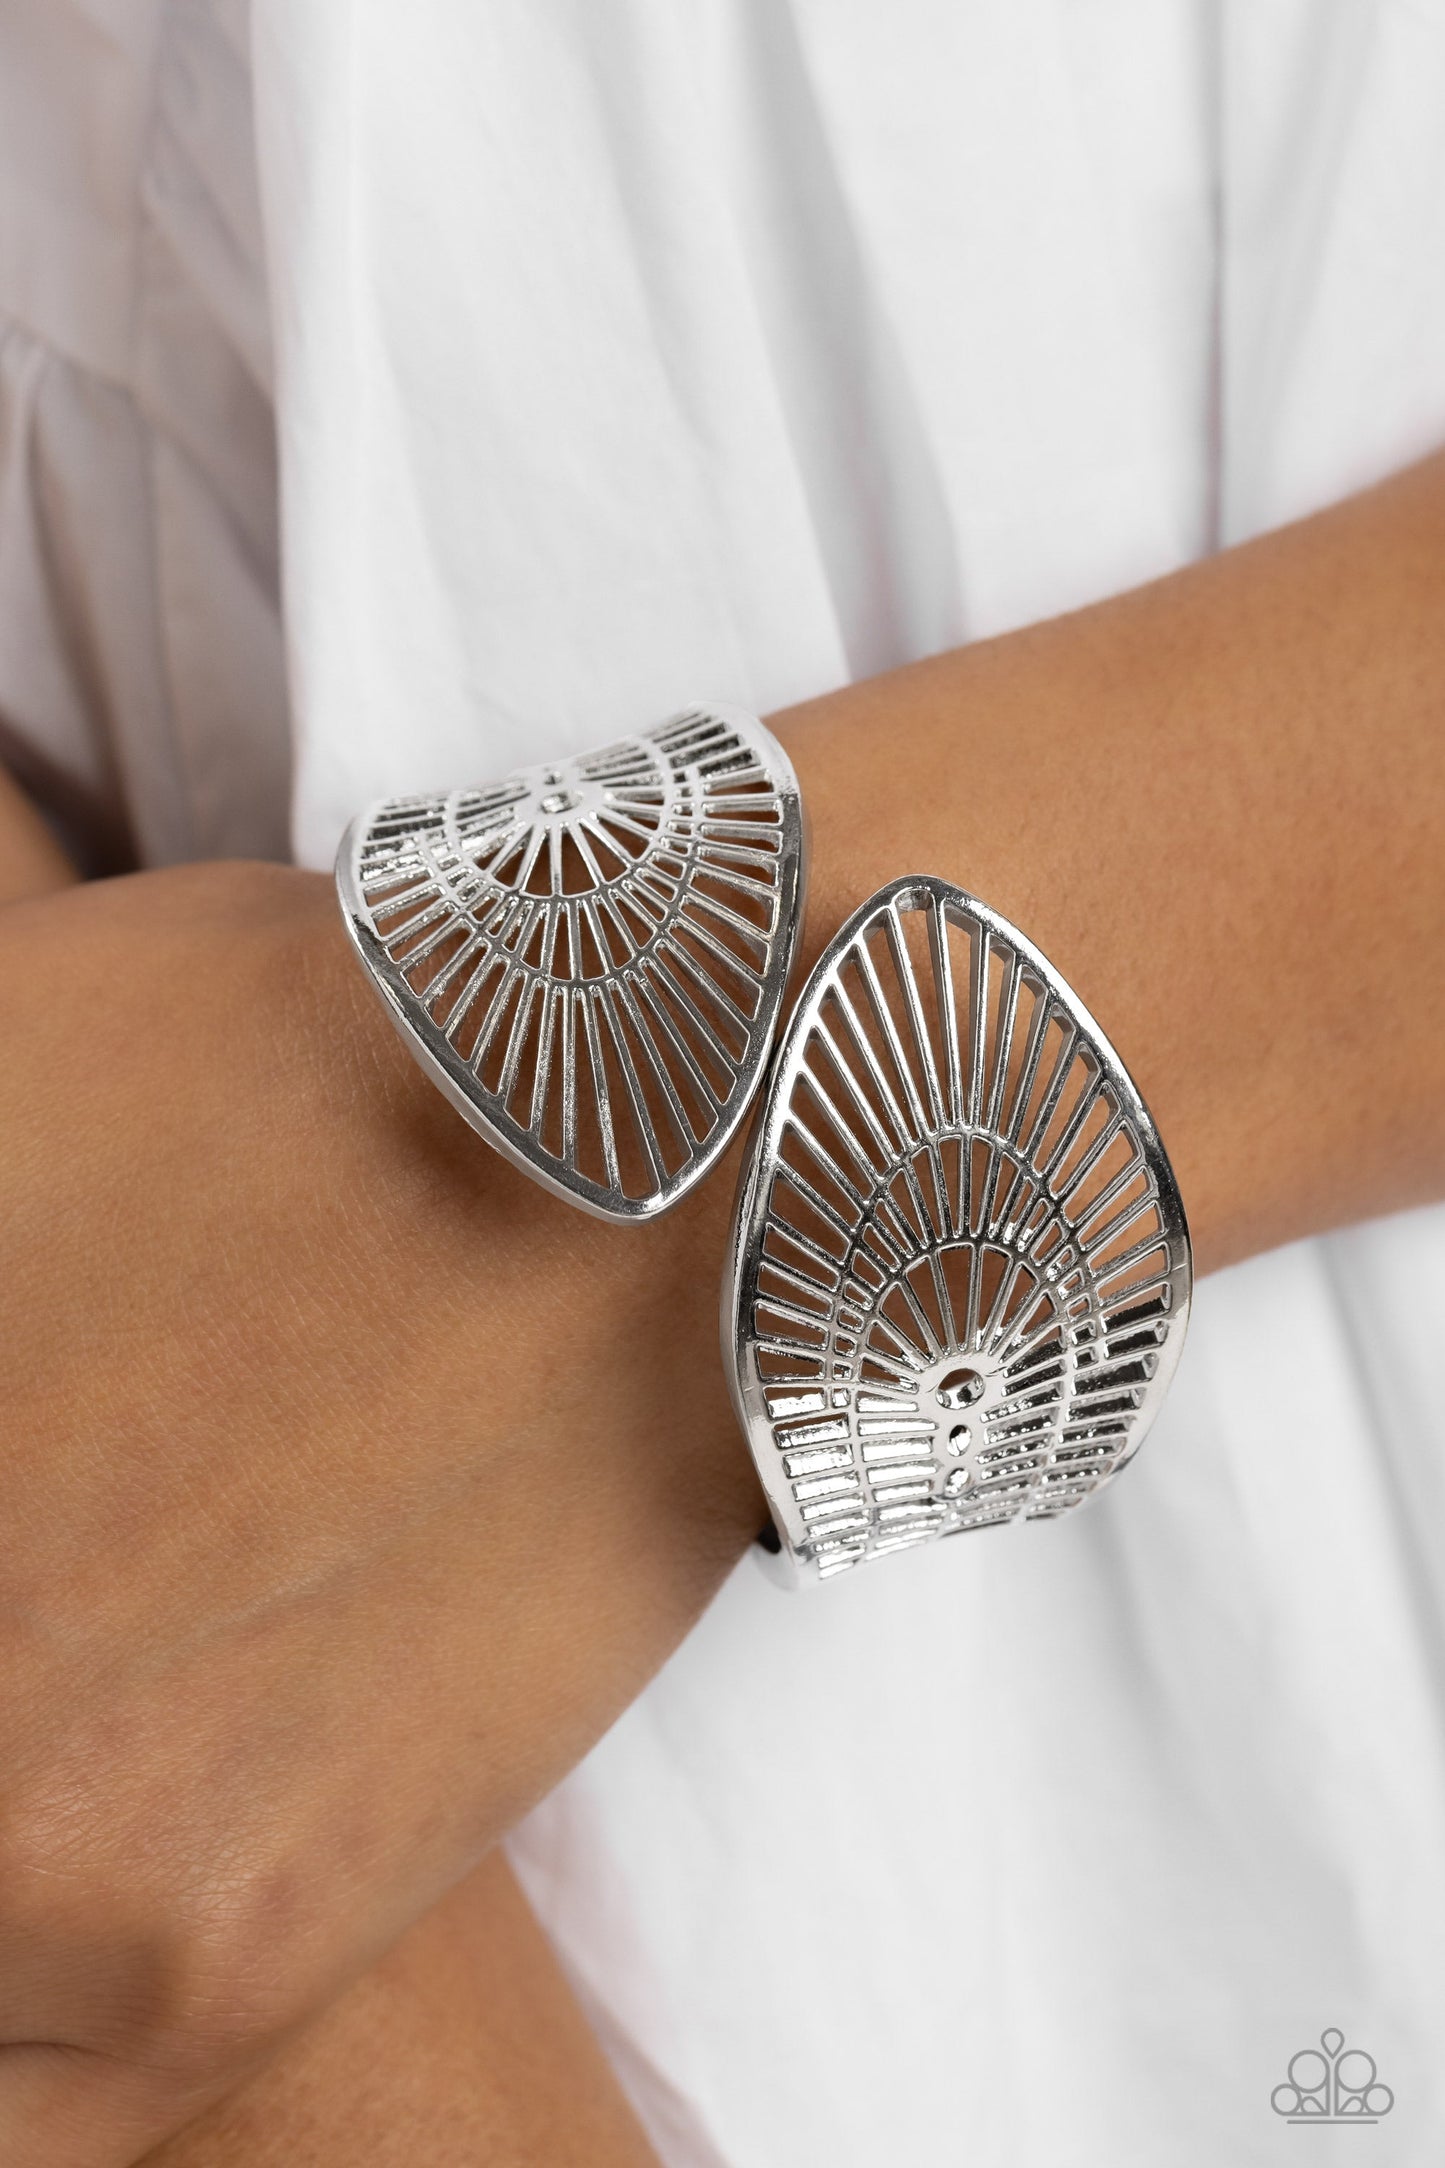 Palatial Palms - Silver Fashion Bracelet - Paparazzi Accessories - Glistening silver bars coalesce into an airy stenciled palm leaf-like bracelet around the wrist for a whimsically metallic look. Features a hinged closure.